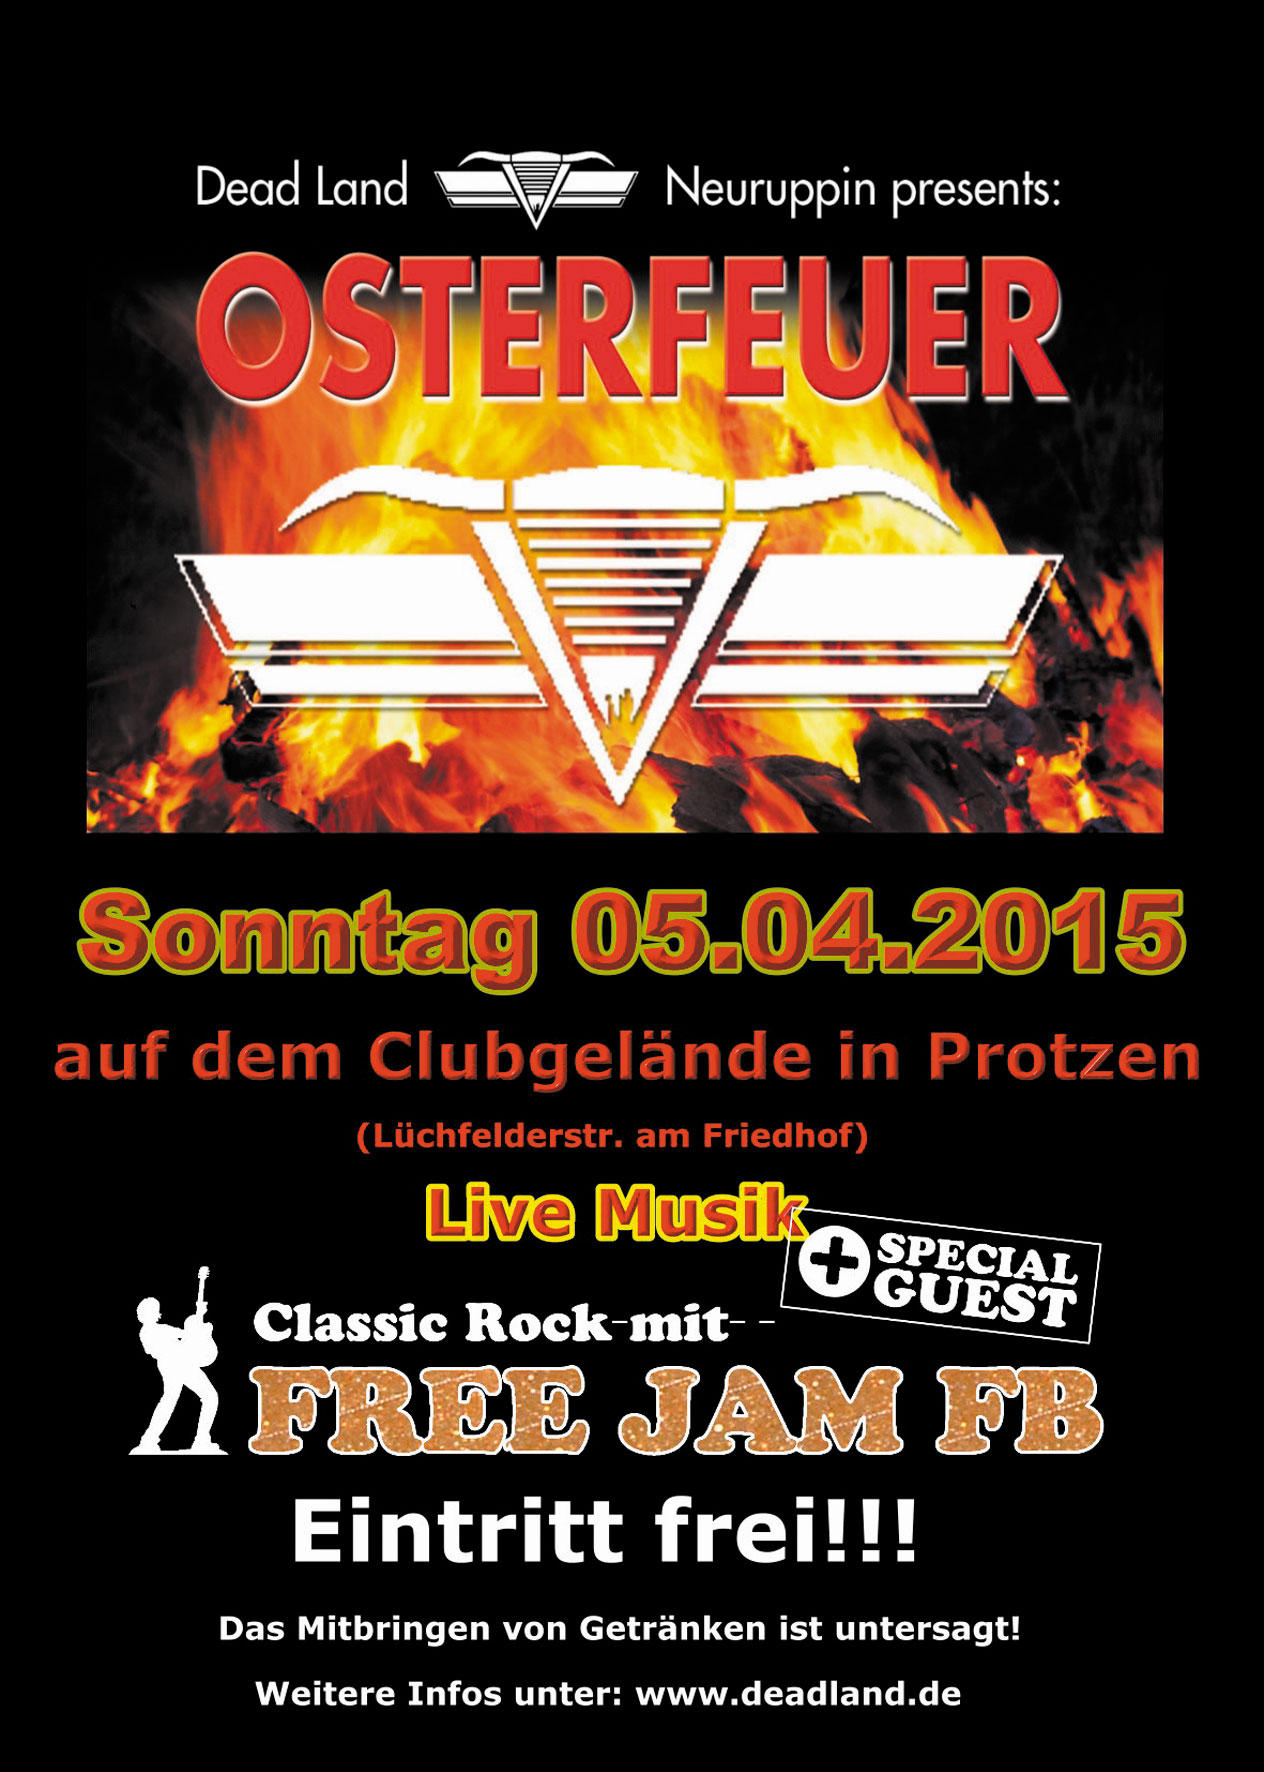 Osterfeuer 05.04.2015